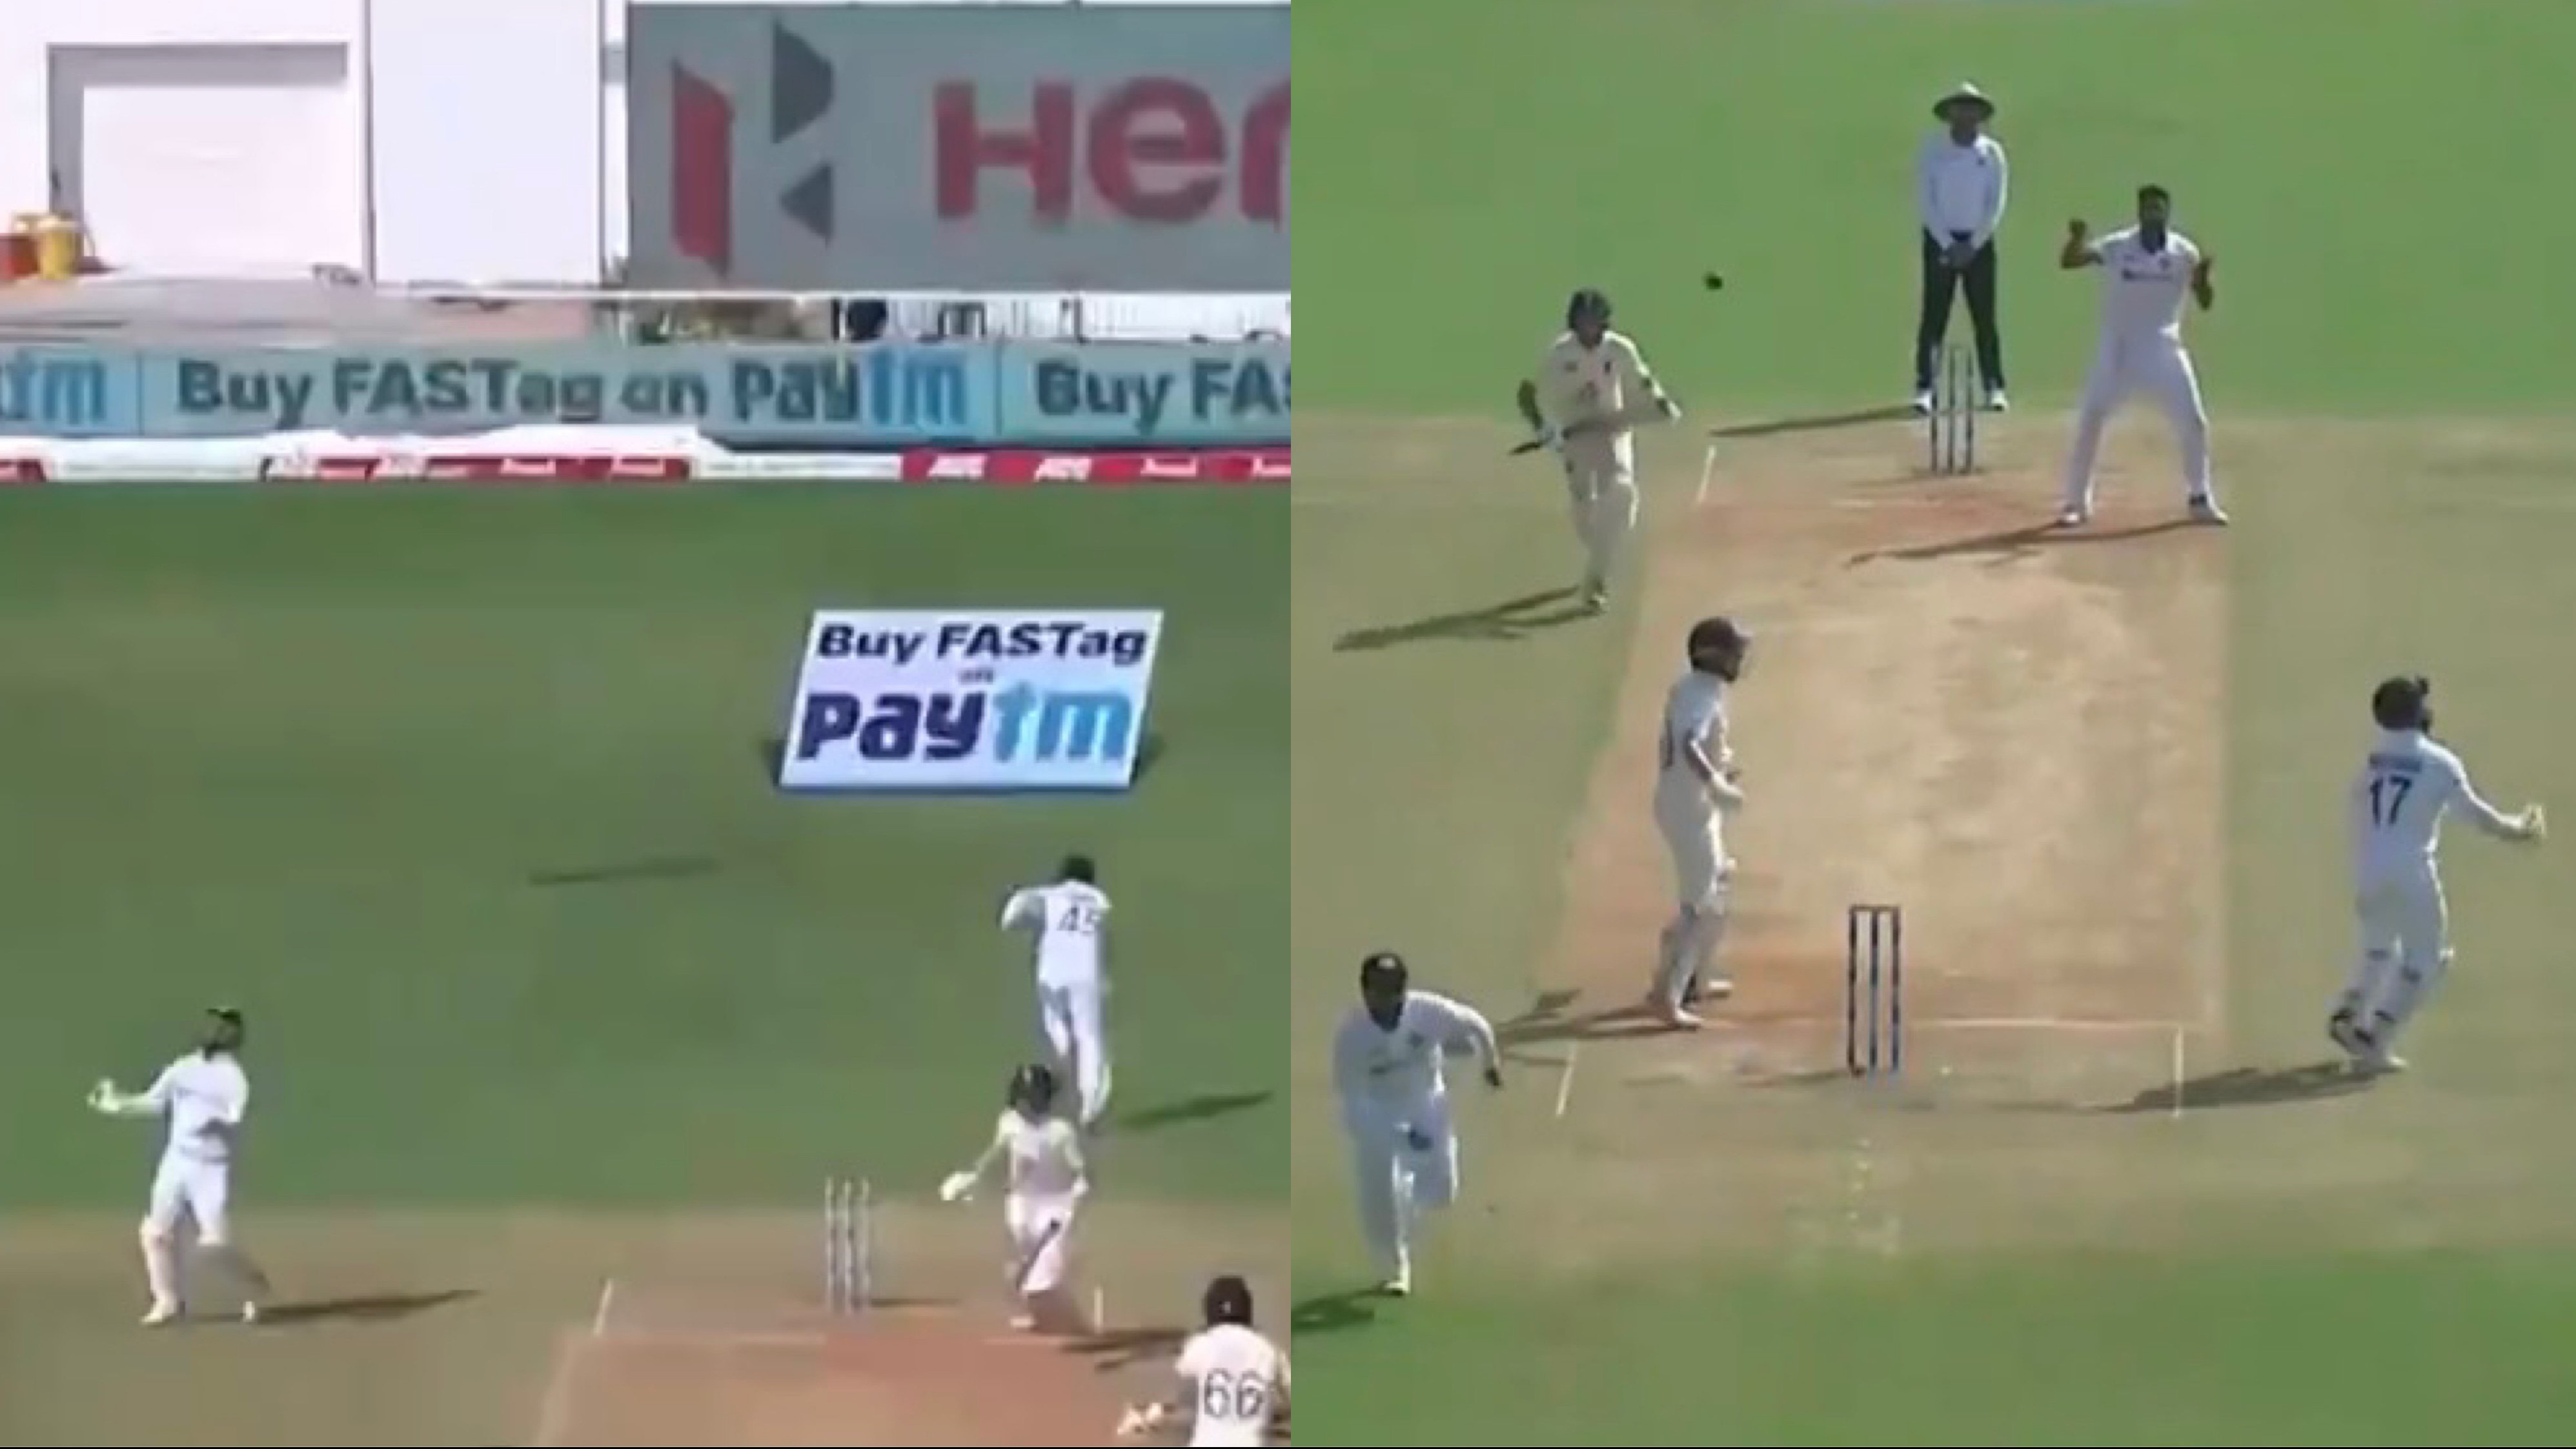 IND v ENG 2021: WATCH - Rishabh Pant runs in the wrong direction as the ball goes behind him